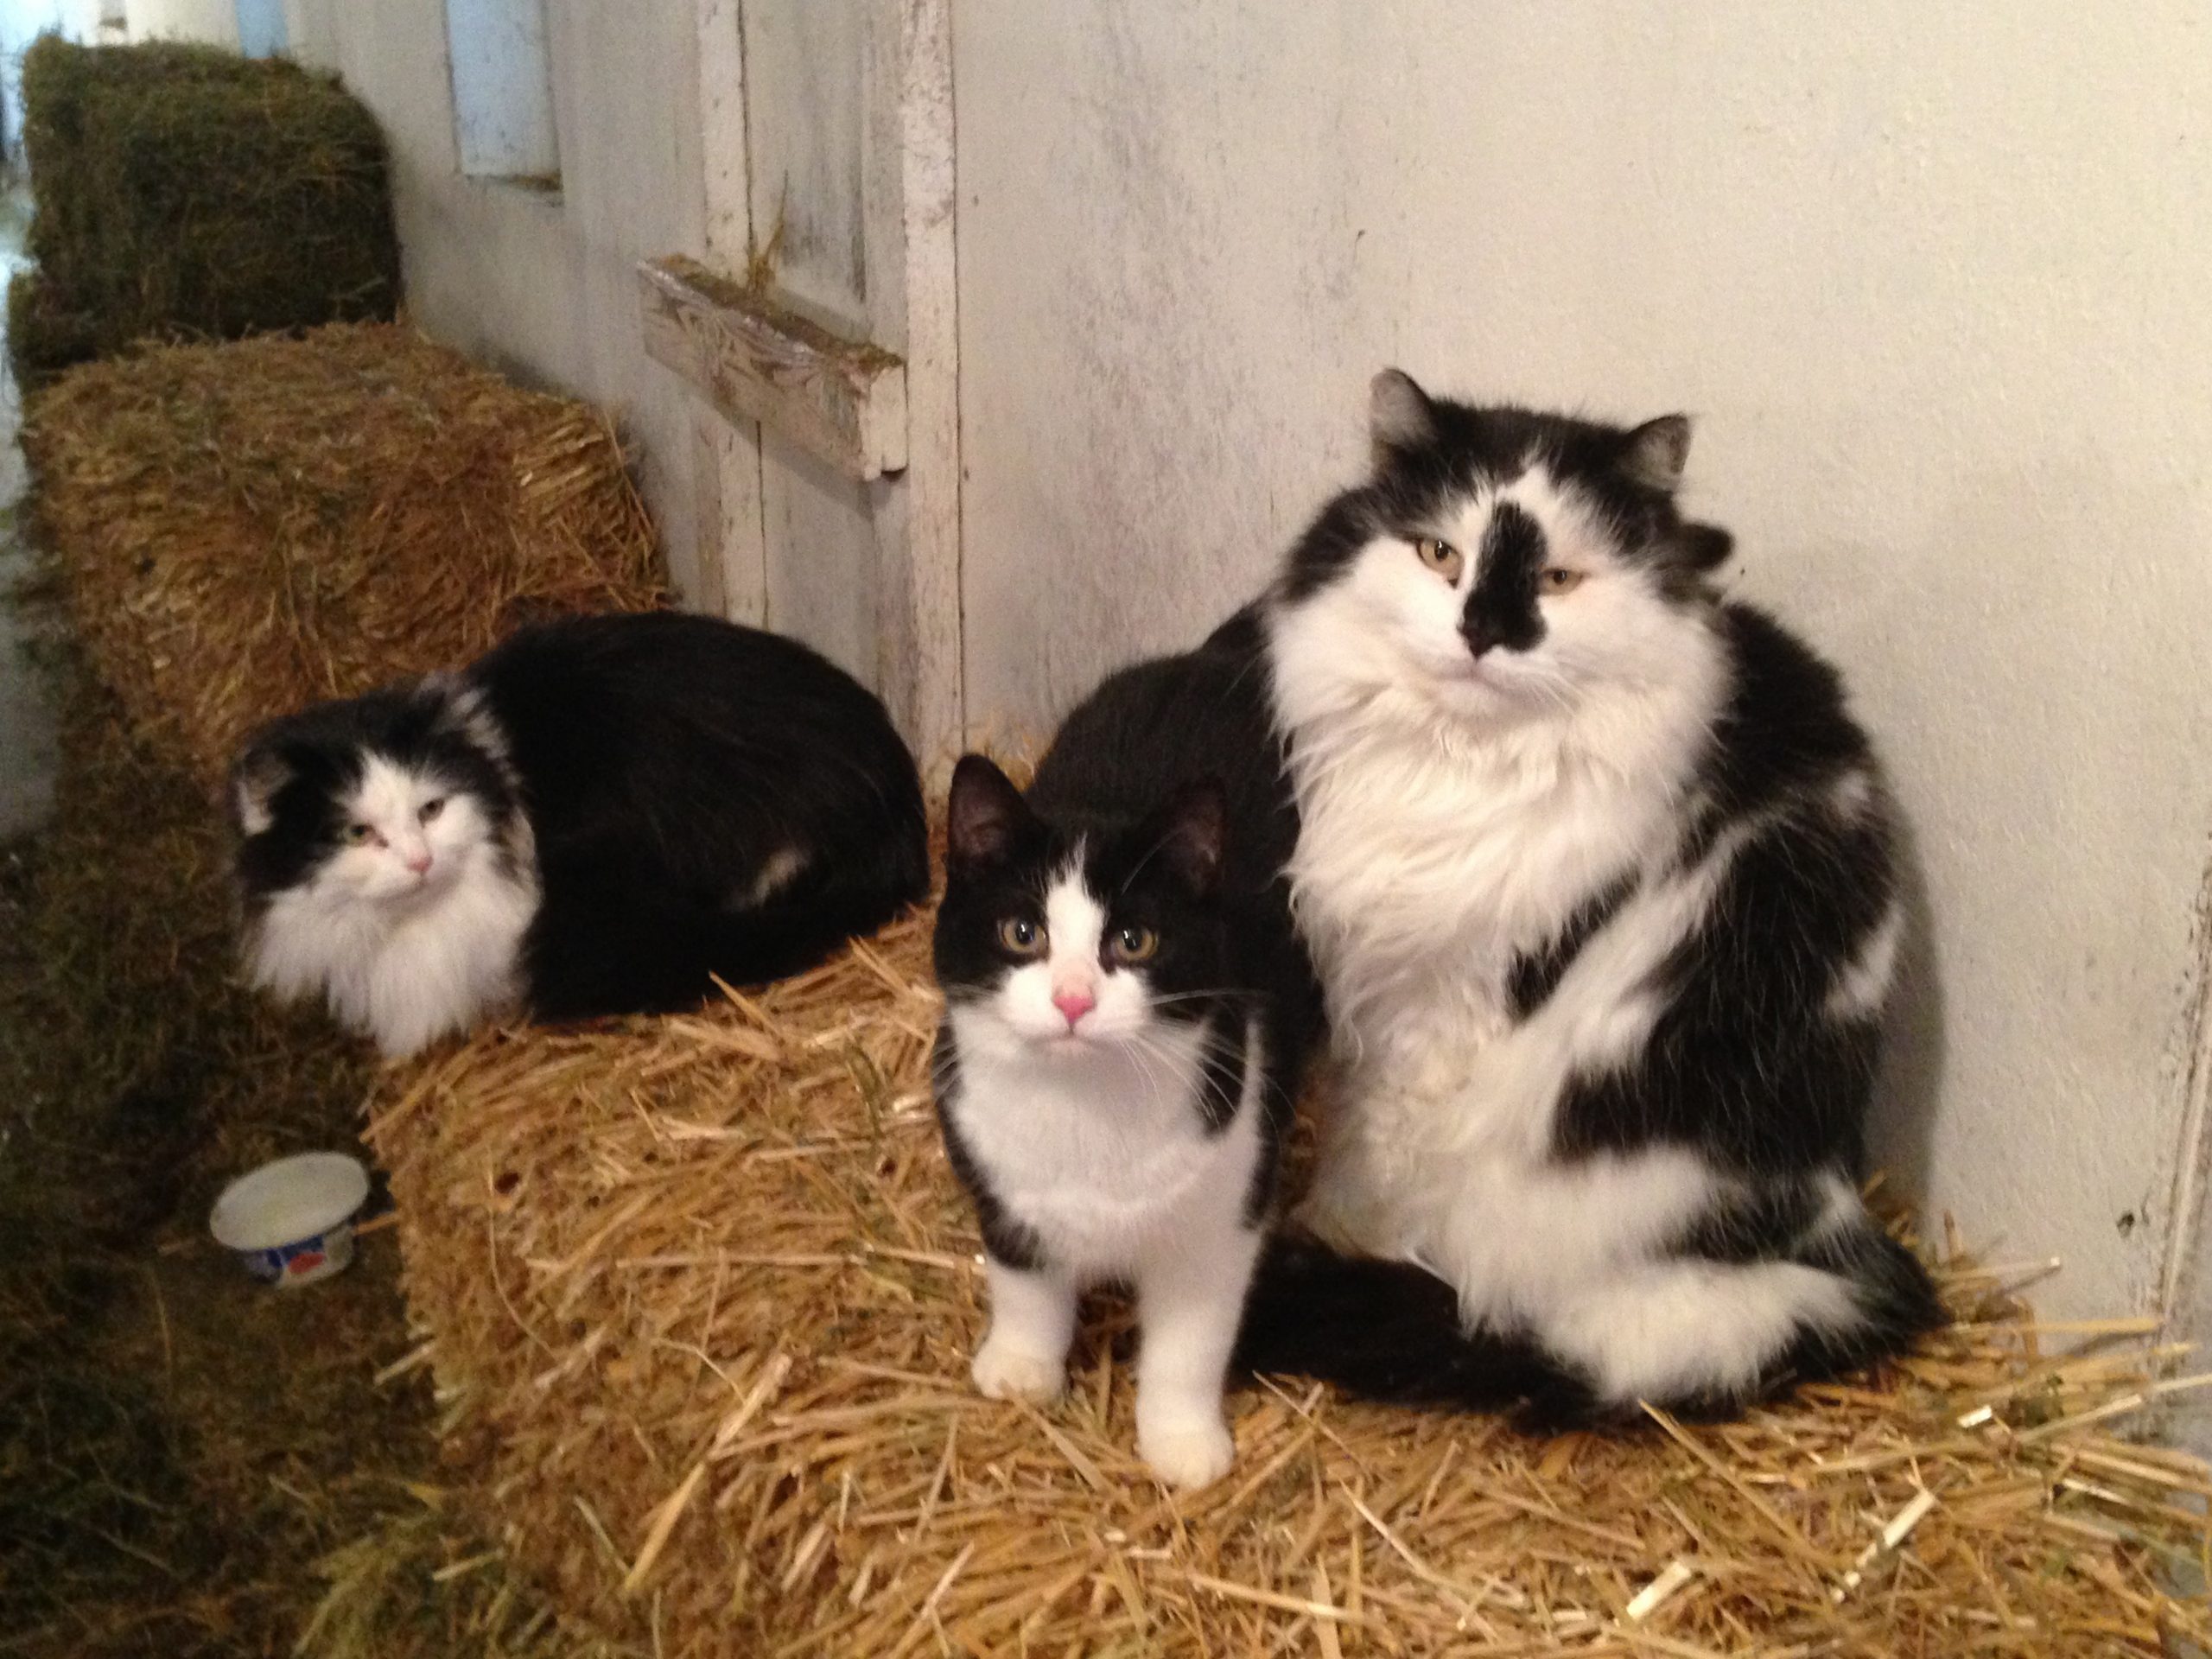 cats sitting on bales of hay